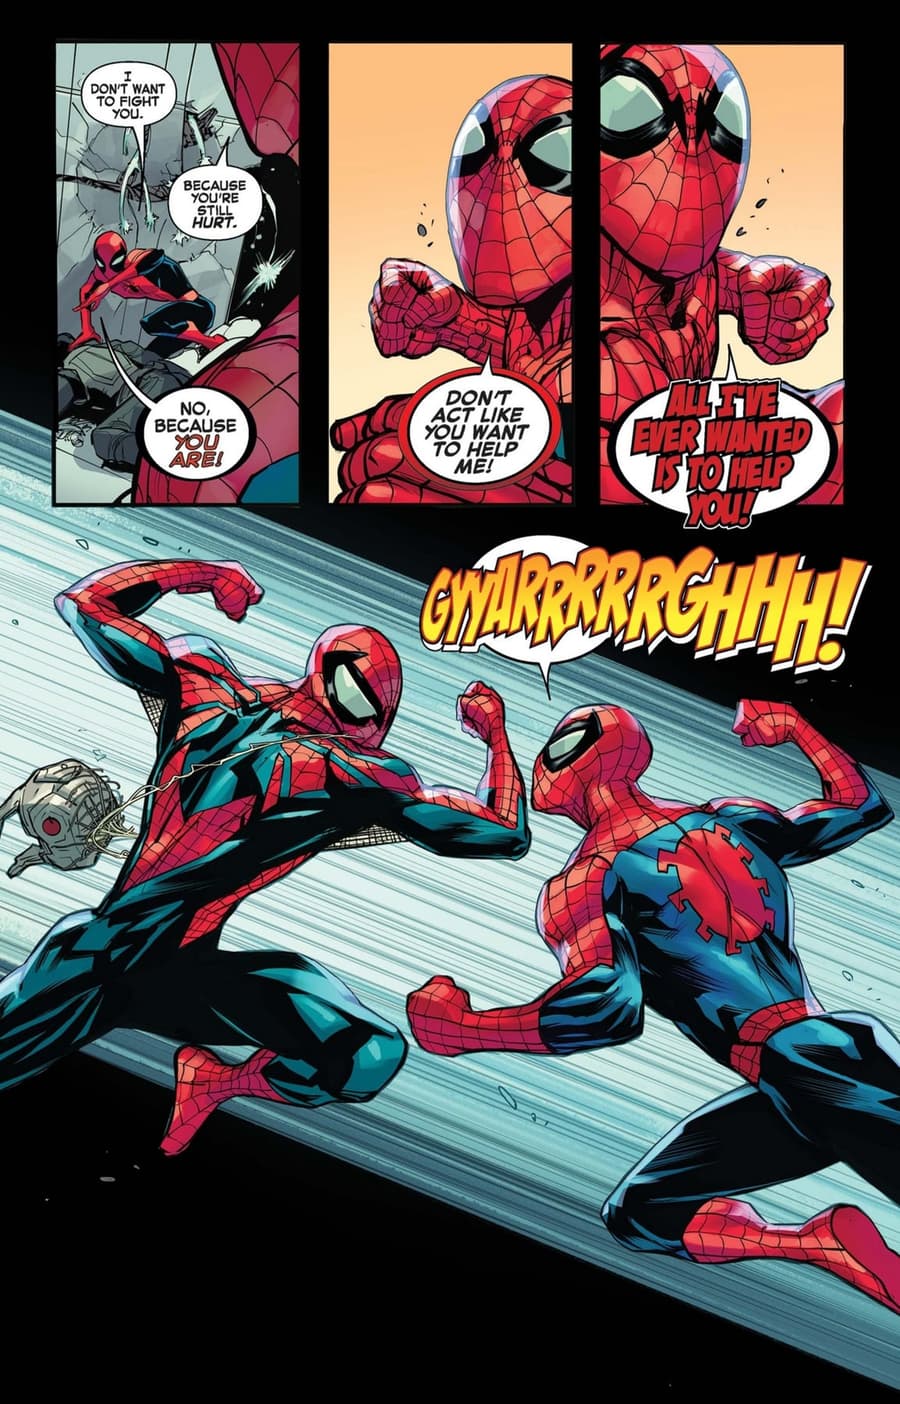 AMAZING SPIDER-MAN (2018) #93 page by Zeb Wells and Patrick Gleason